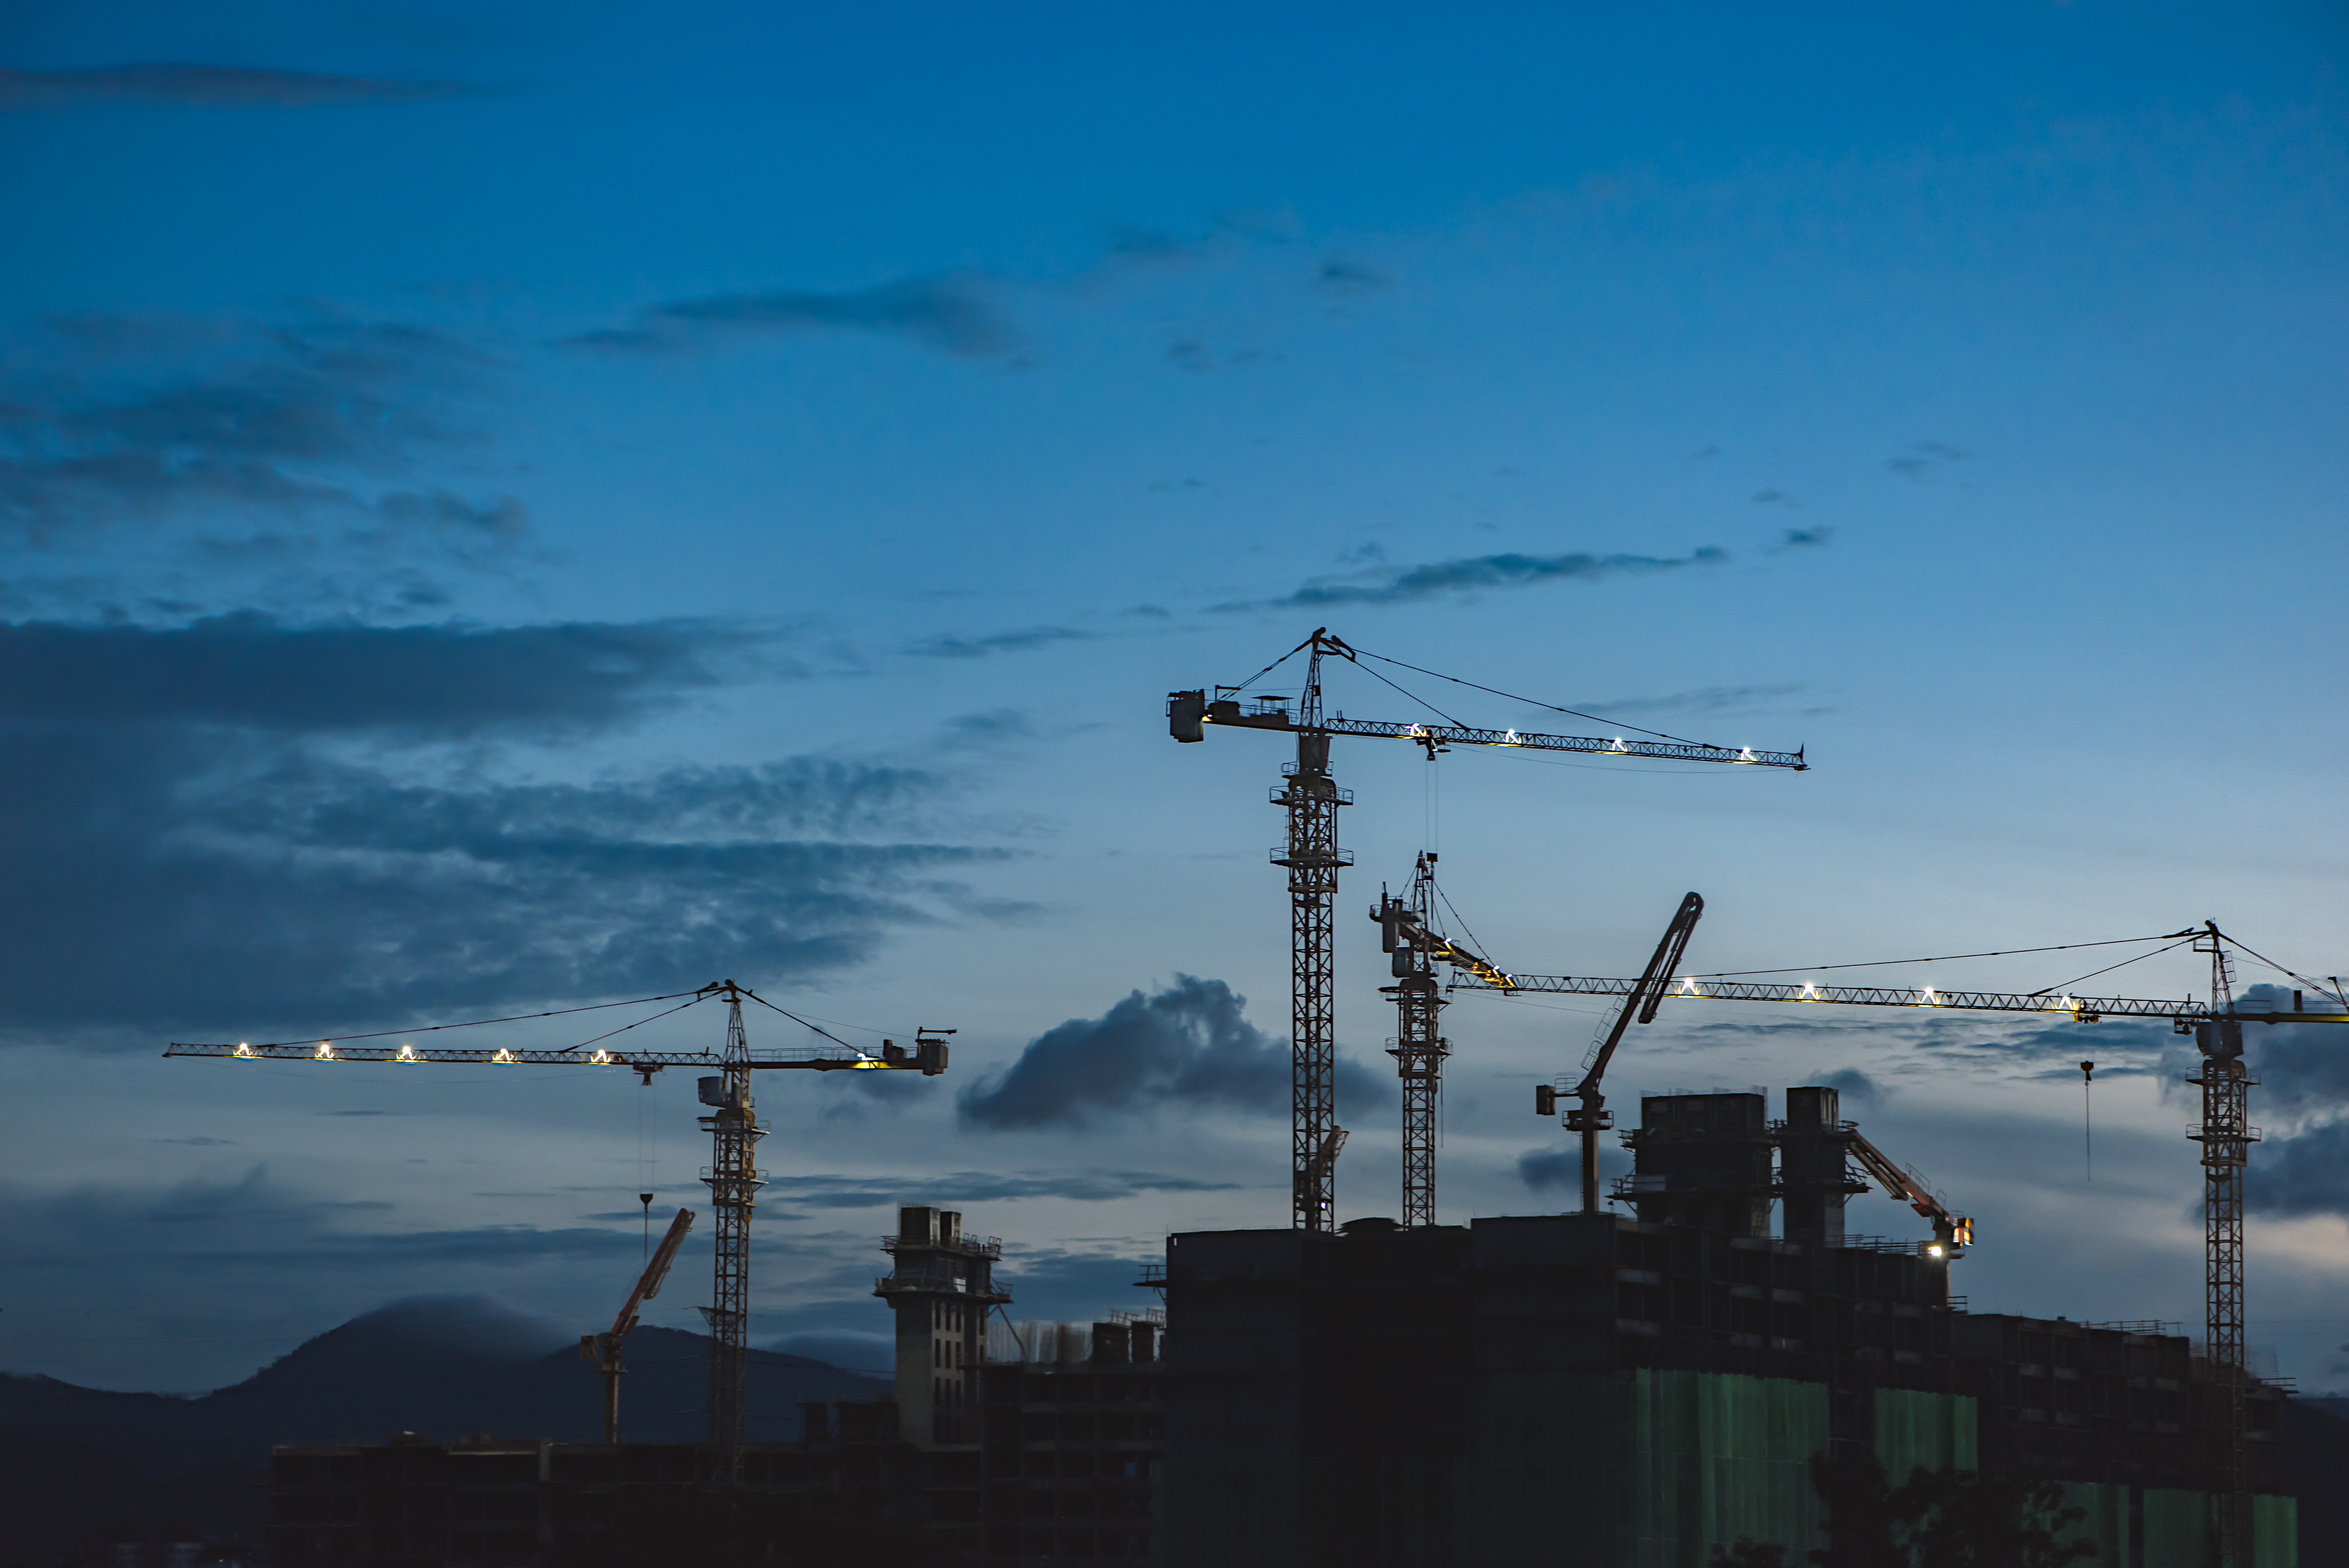 Image shows a construction site at twilight